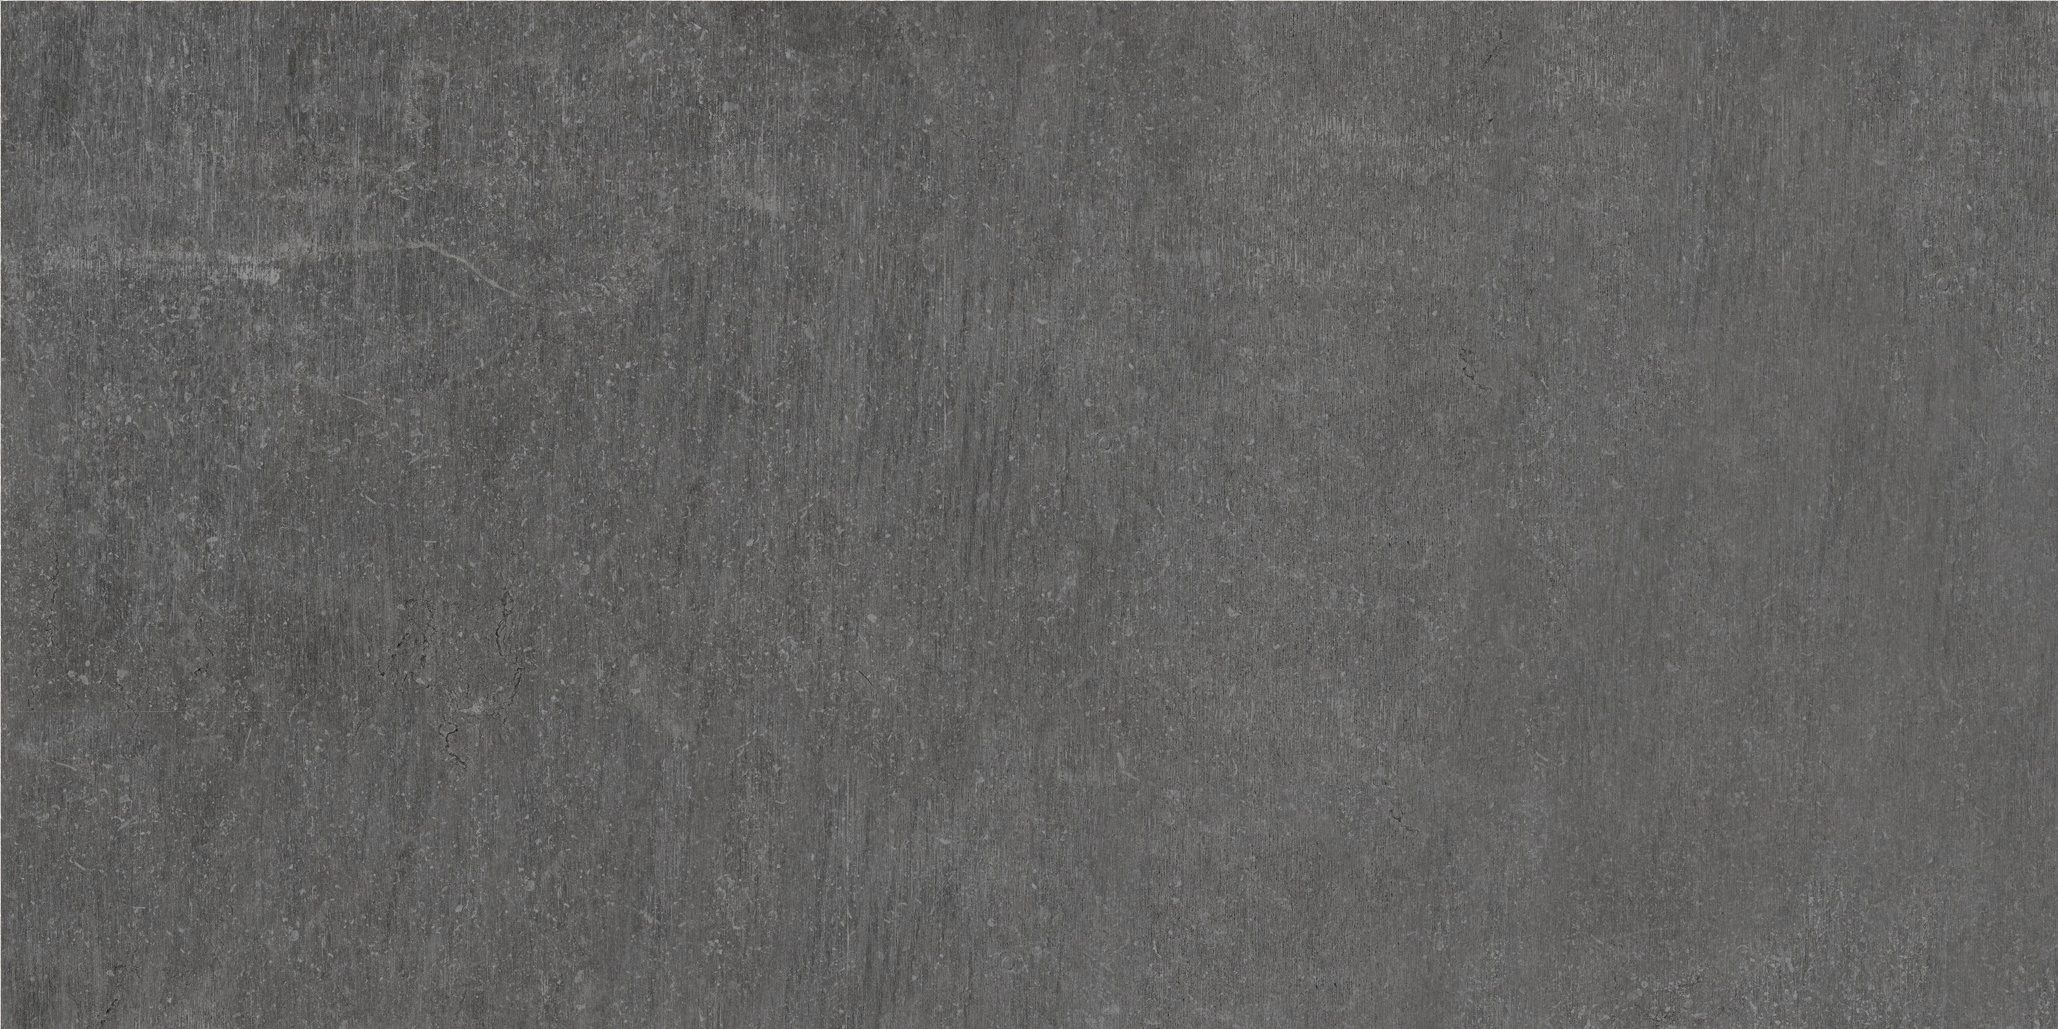 graphite pattern glazed porcelain field tile from nexus anatolia collection distributed by surface group international matte finish pressed edge 16x32 rectangle shape